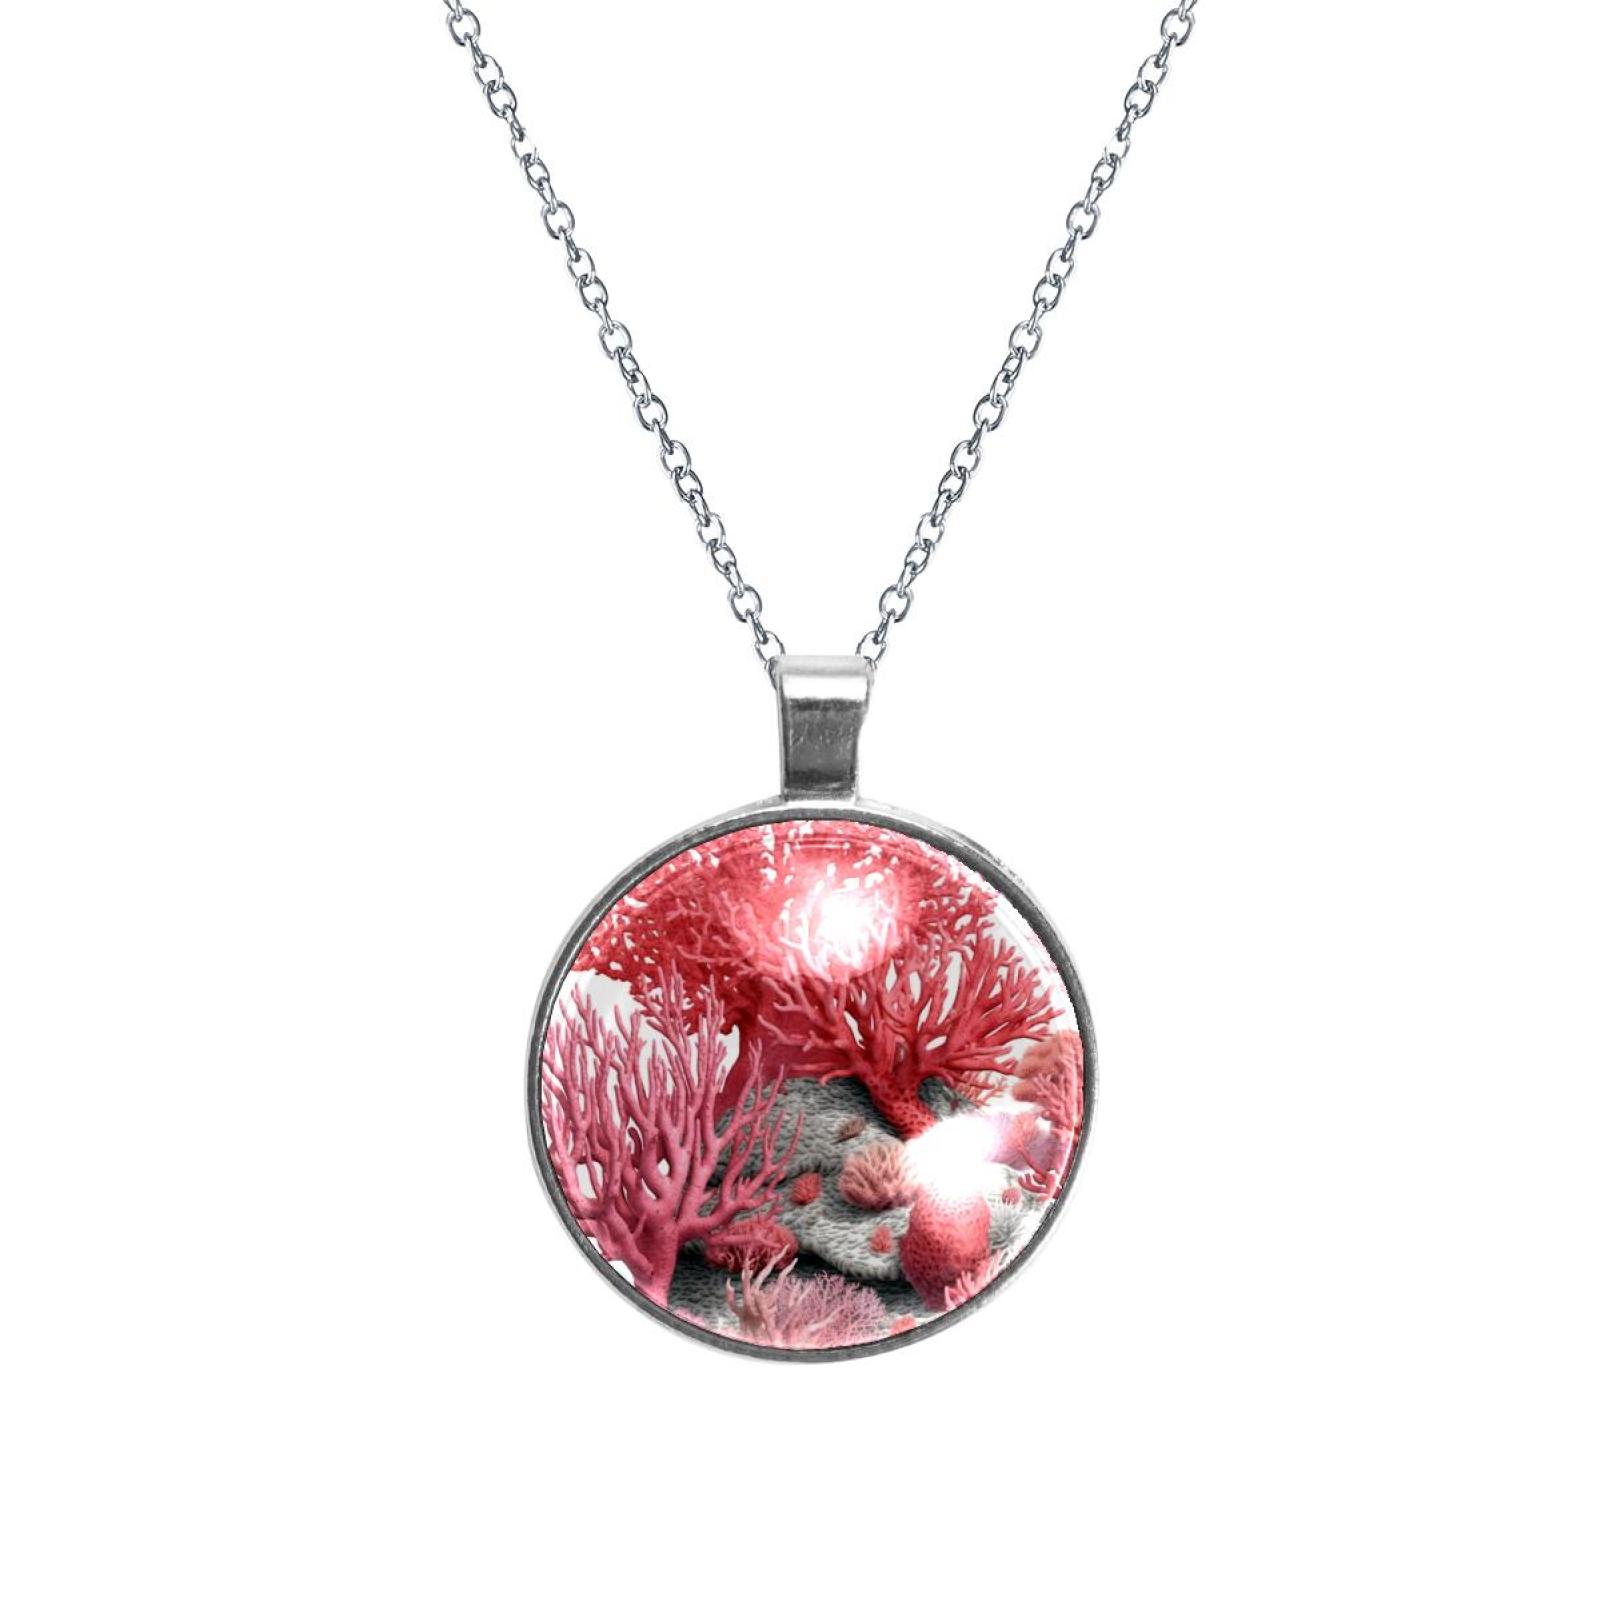 Coral Stunning Glass Circular Pendant Necklace - Elegant Jewelry for ...